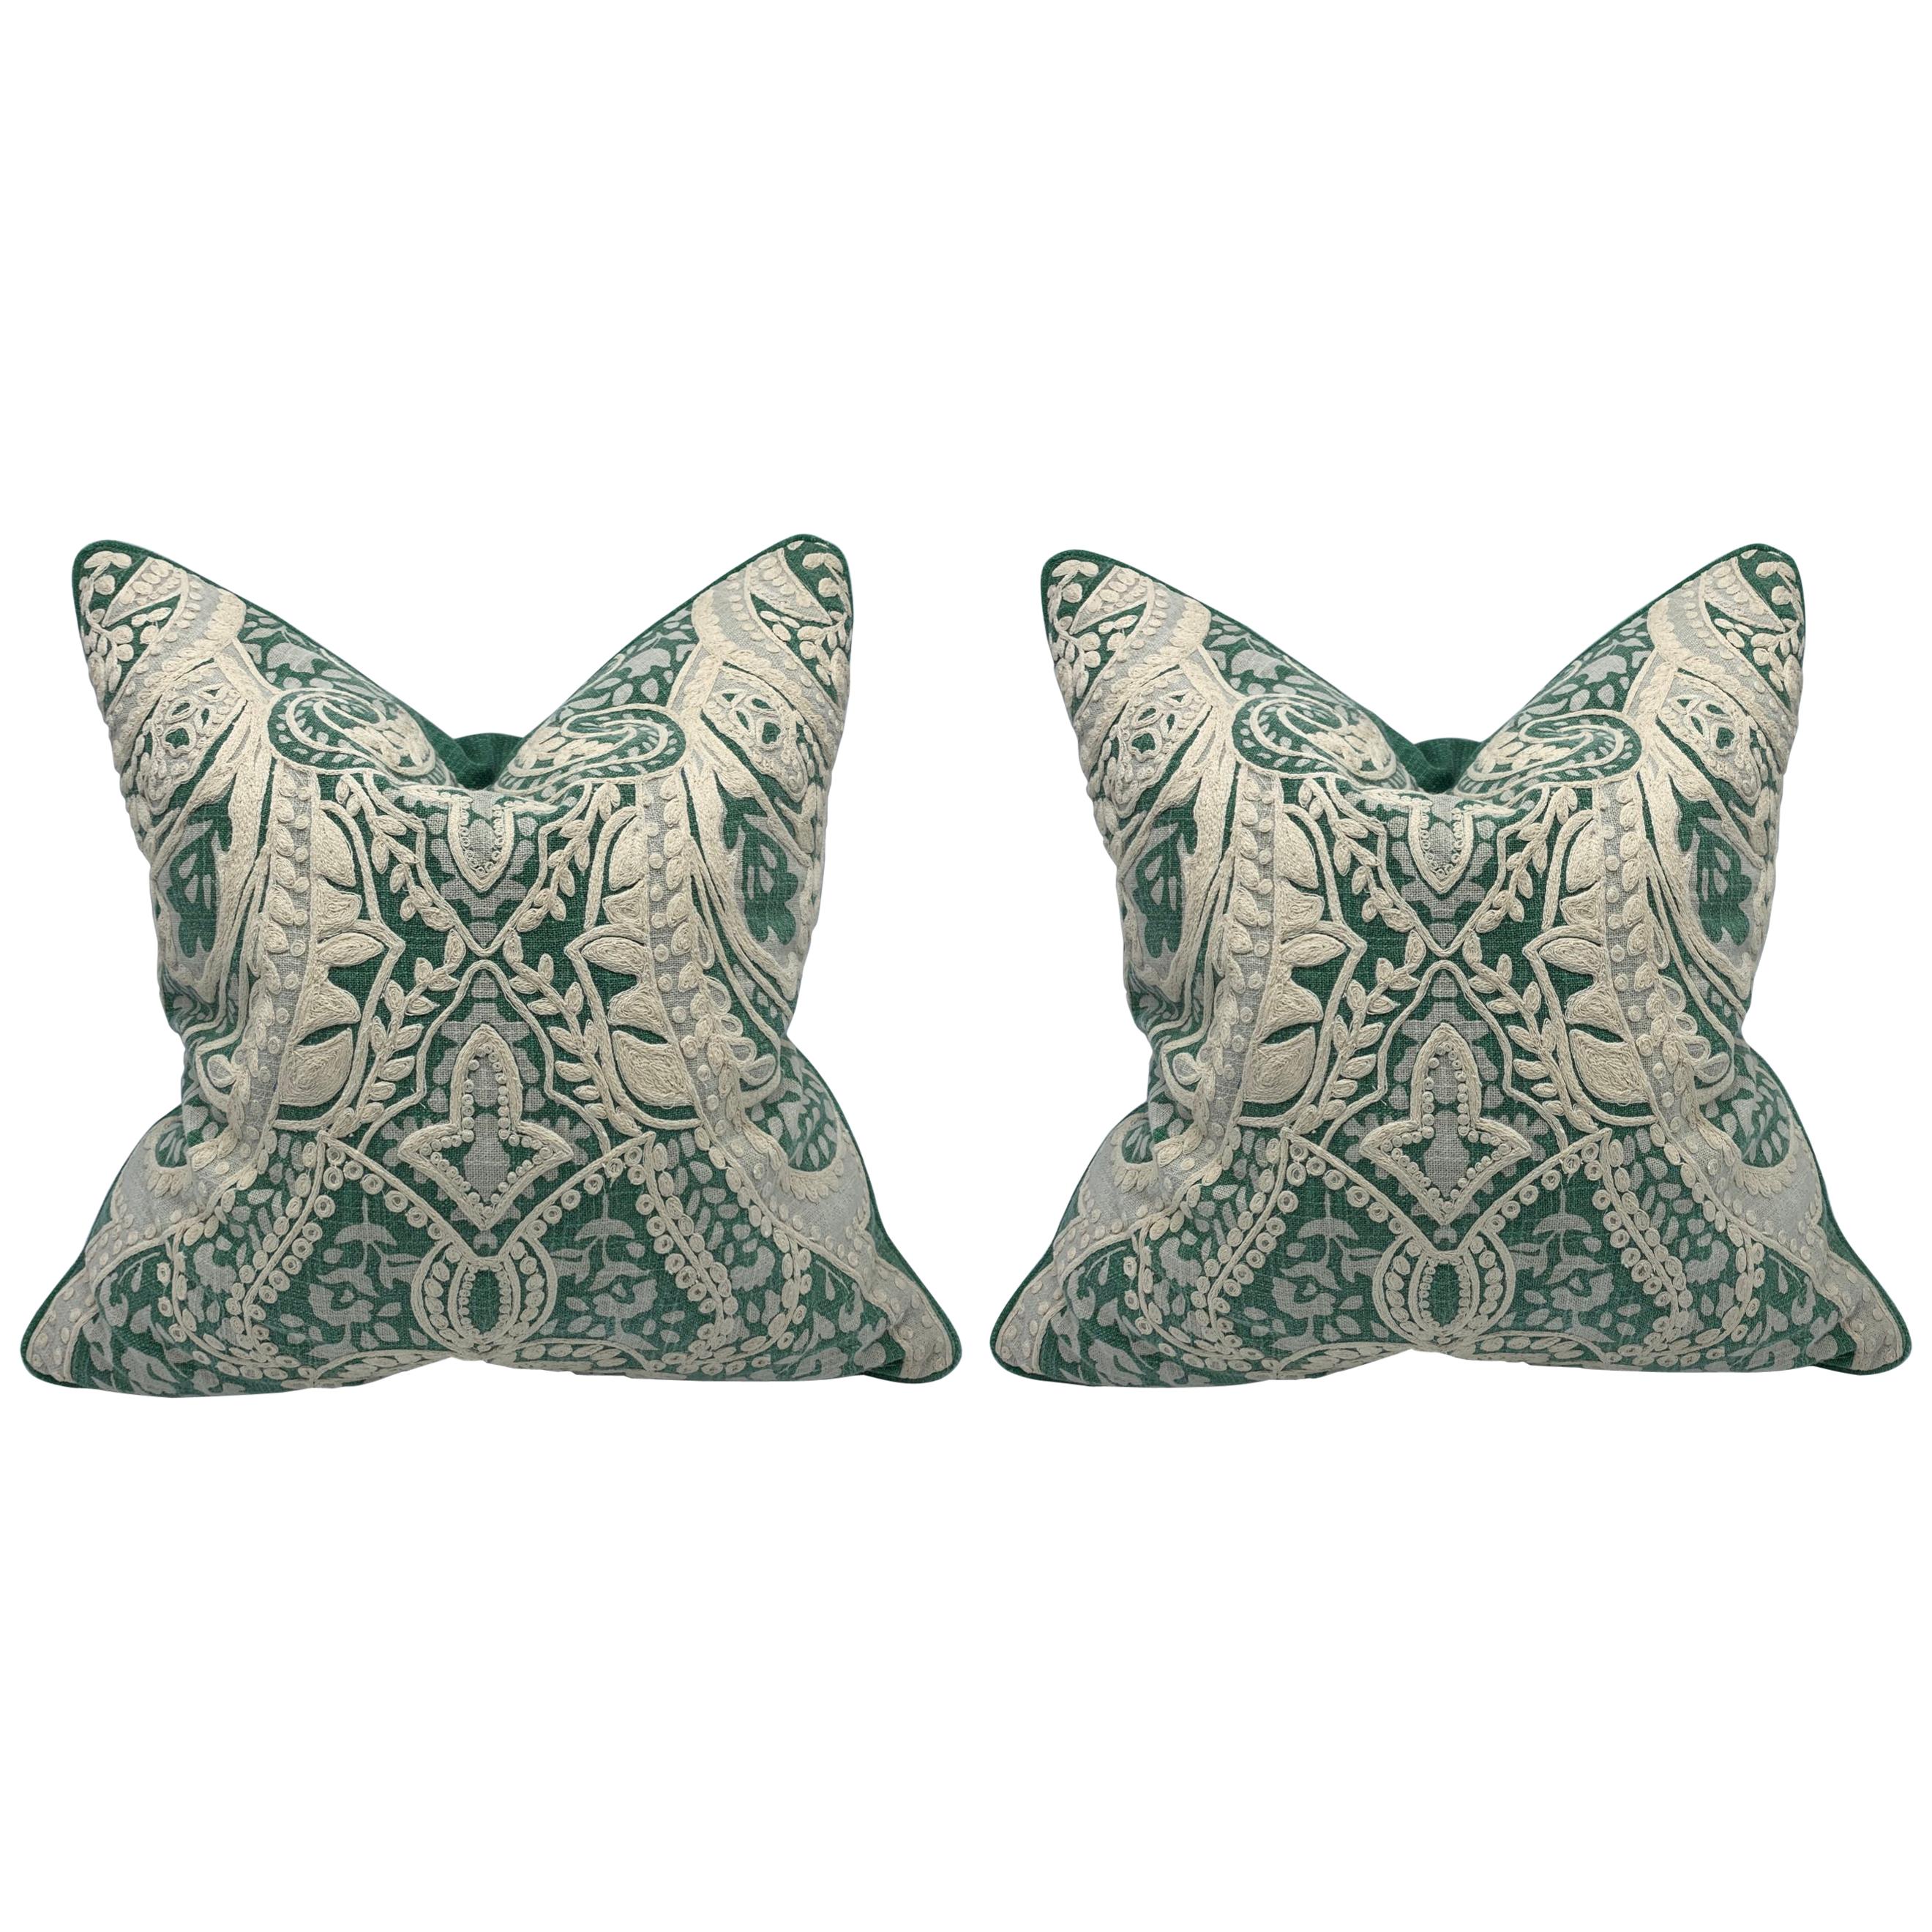 Green and White Linen Pillows with Damask Embroidery, Pair For Sale